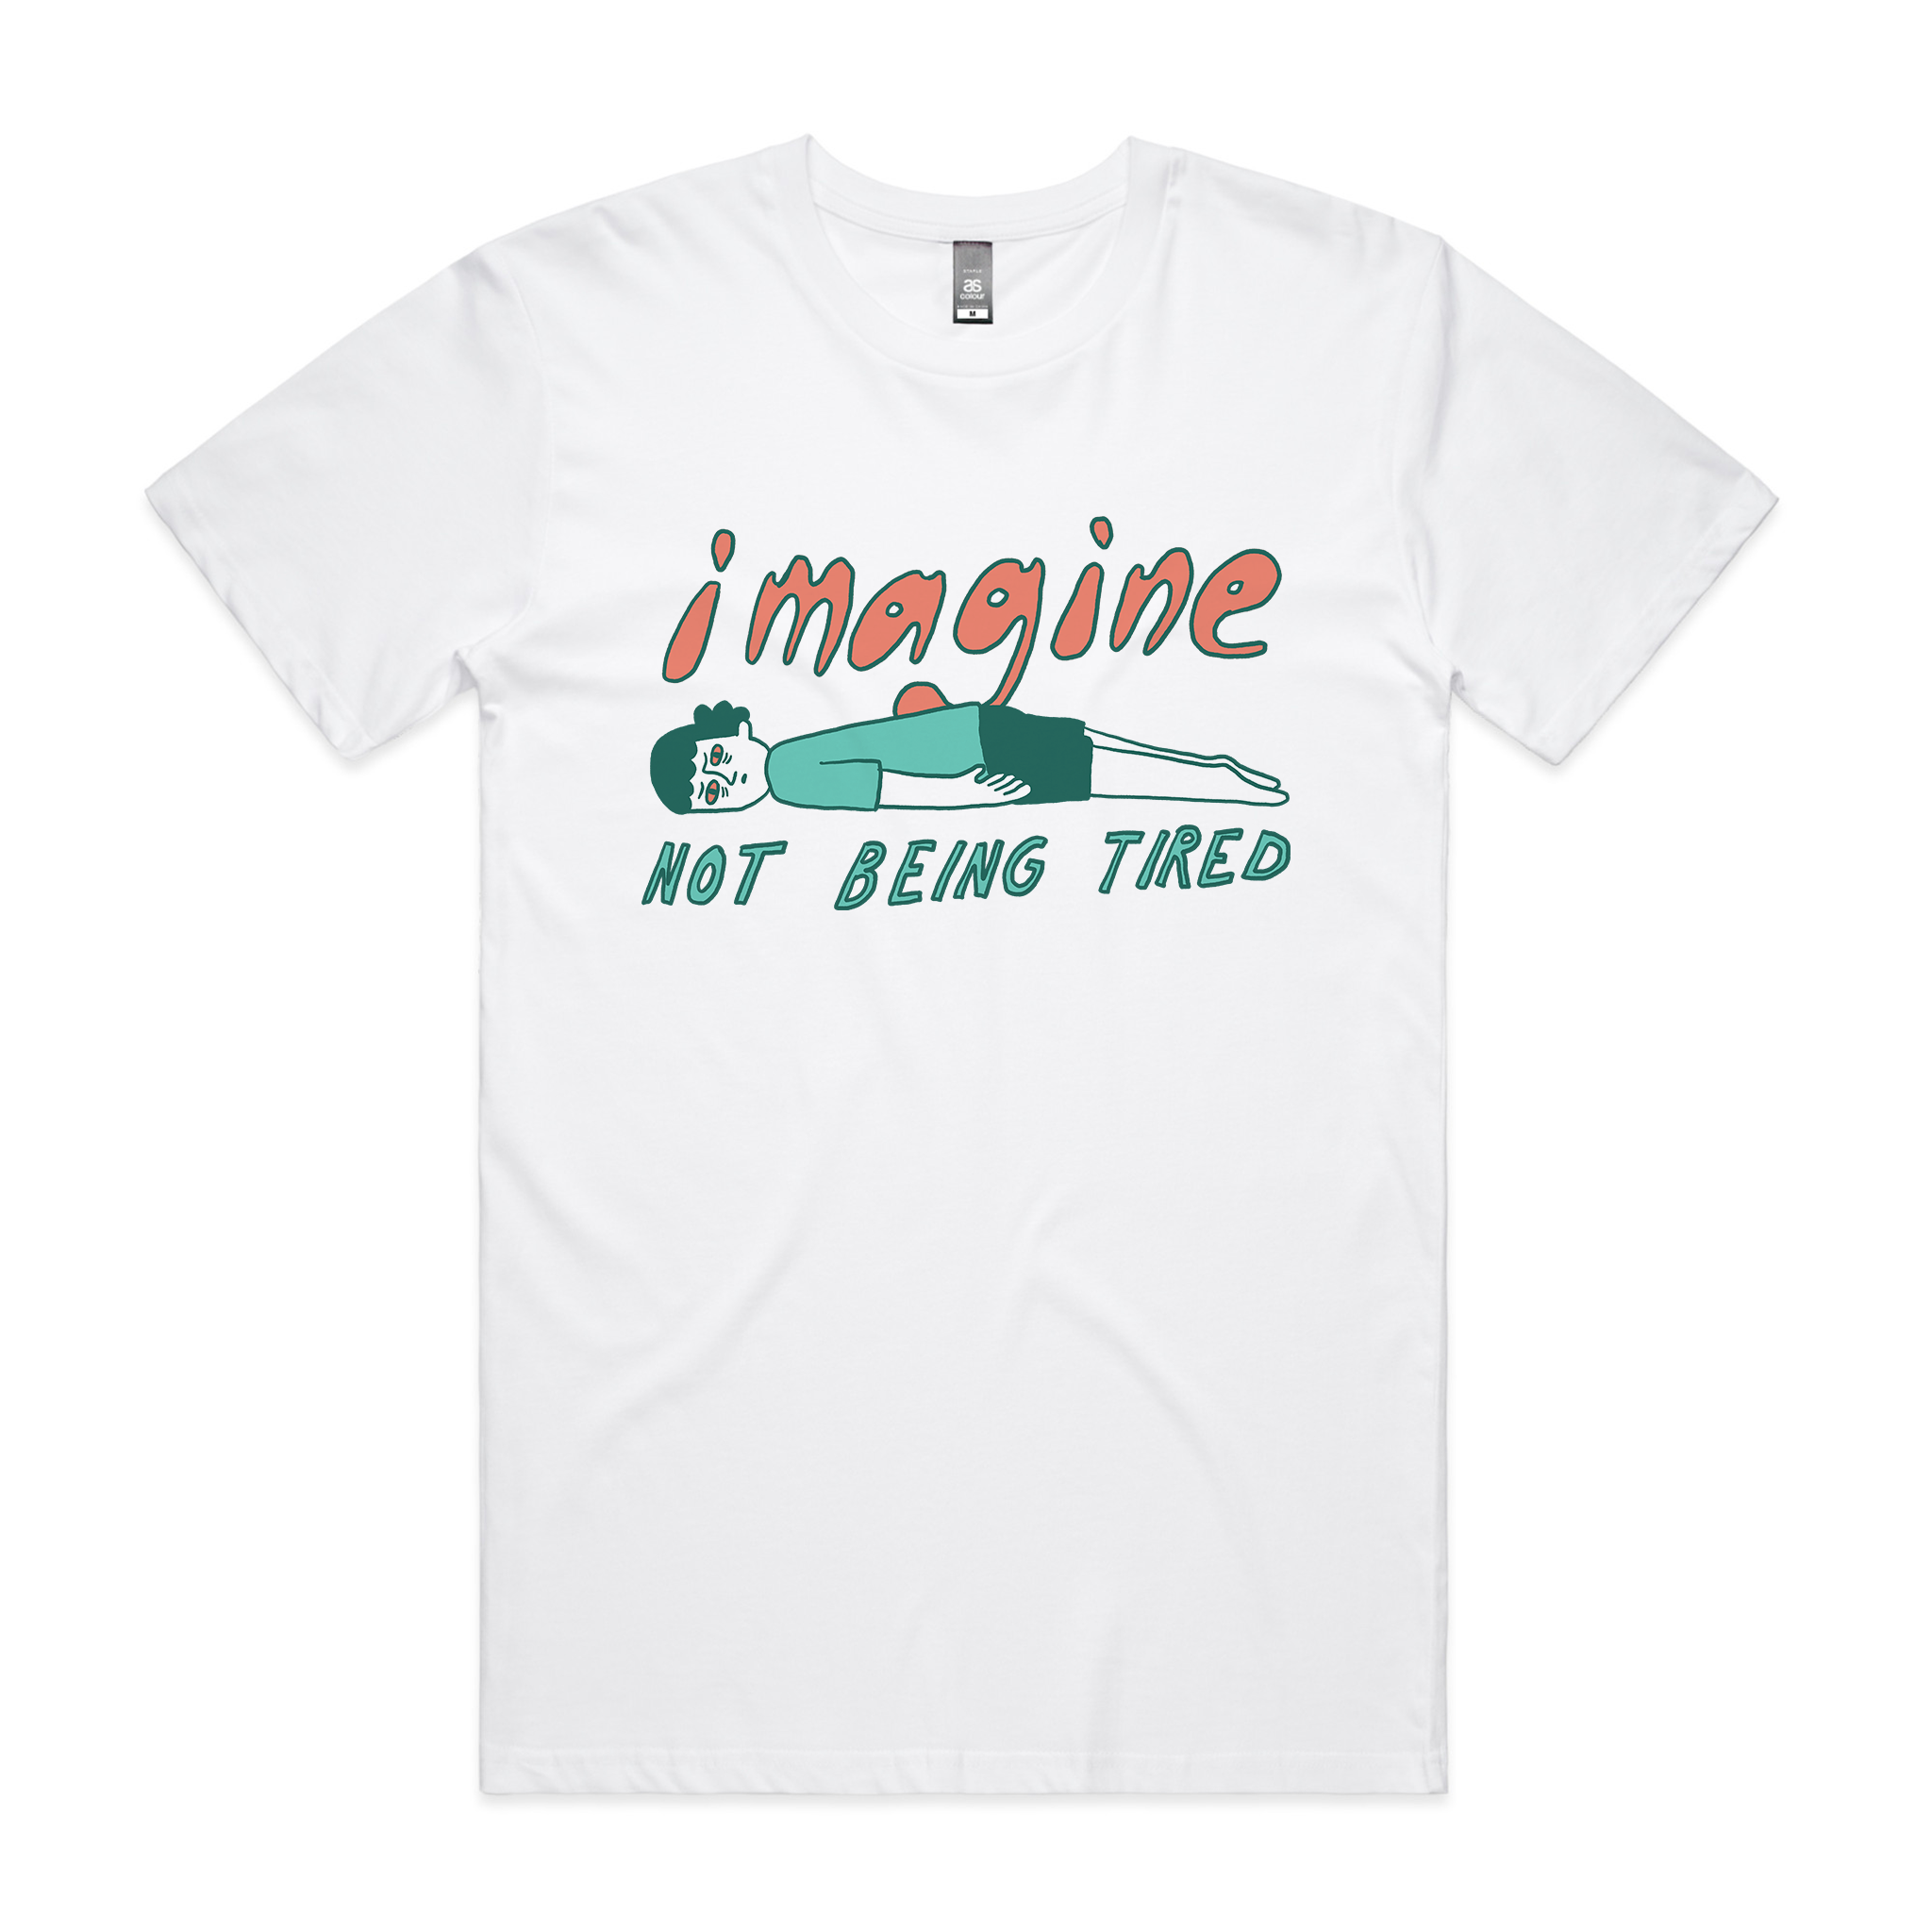 Not Being Tired Tee